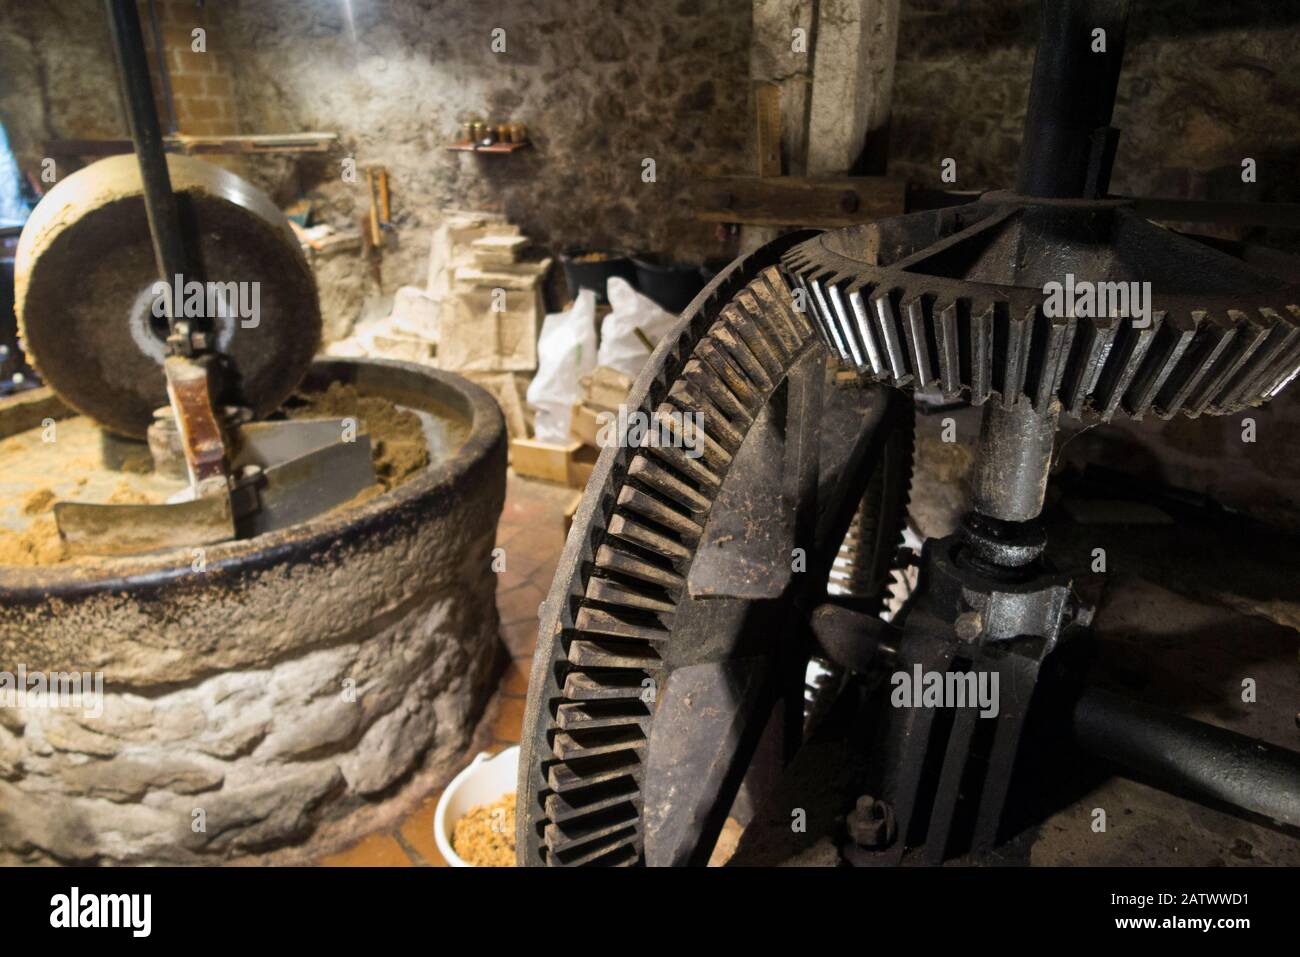 Metal wheels with cogs and teeth at the Le Moulin de Chanaz where milling grinding of the walnuts with round stone water powered mill grind wheel prior to pressing them / compressing to extract the Walnut oil takes place, at a watermill in France Stock Photo